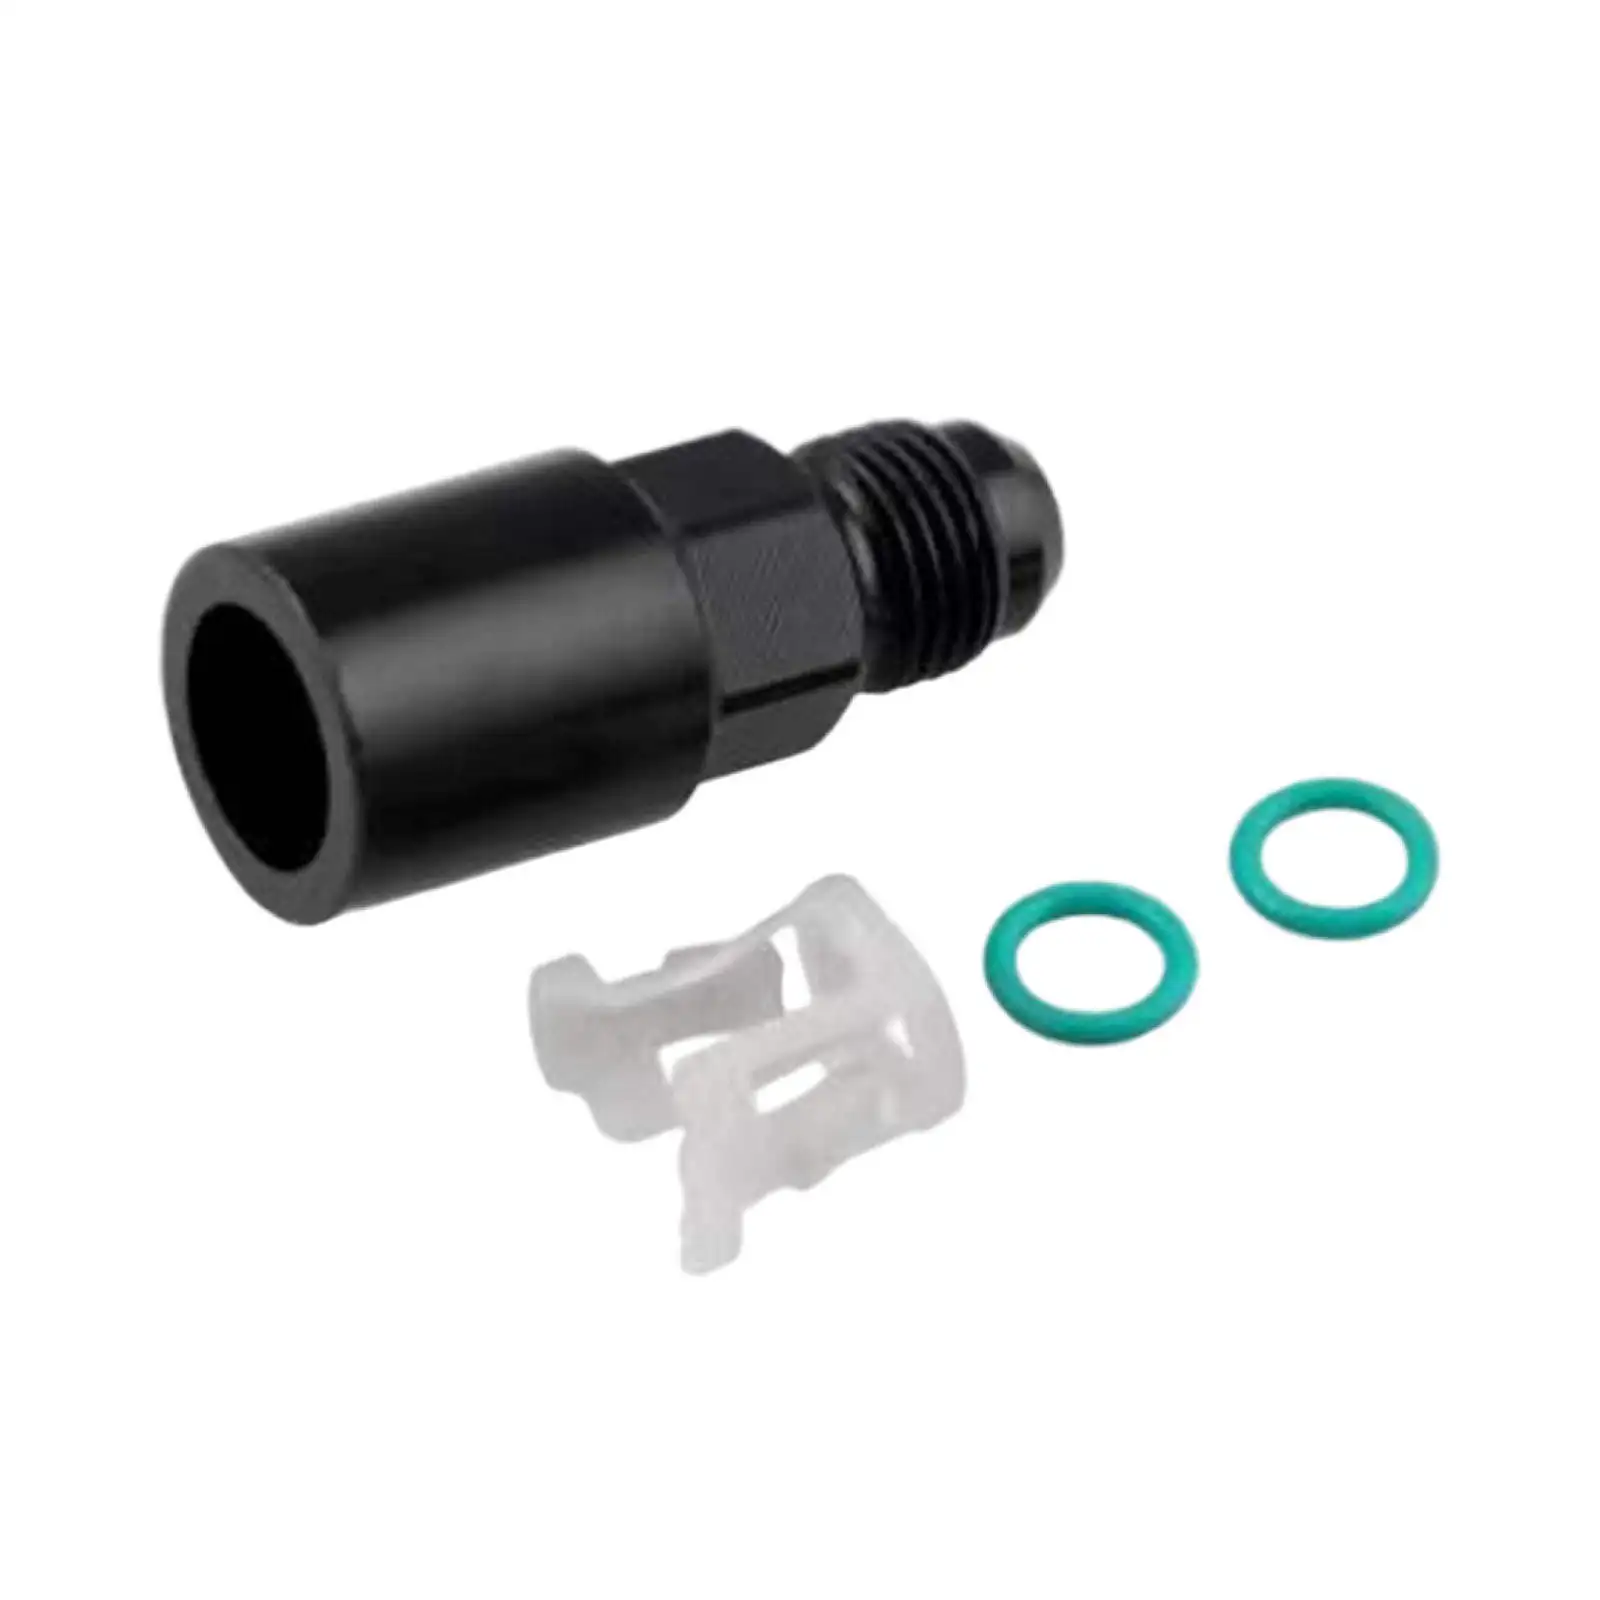 Fuel Adapter Fitting 6AN to 5/16 GM Black Quick Connect Fuel Distribution Pipe Joint Fits for Fuel Rail Quick Connect Fitting